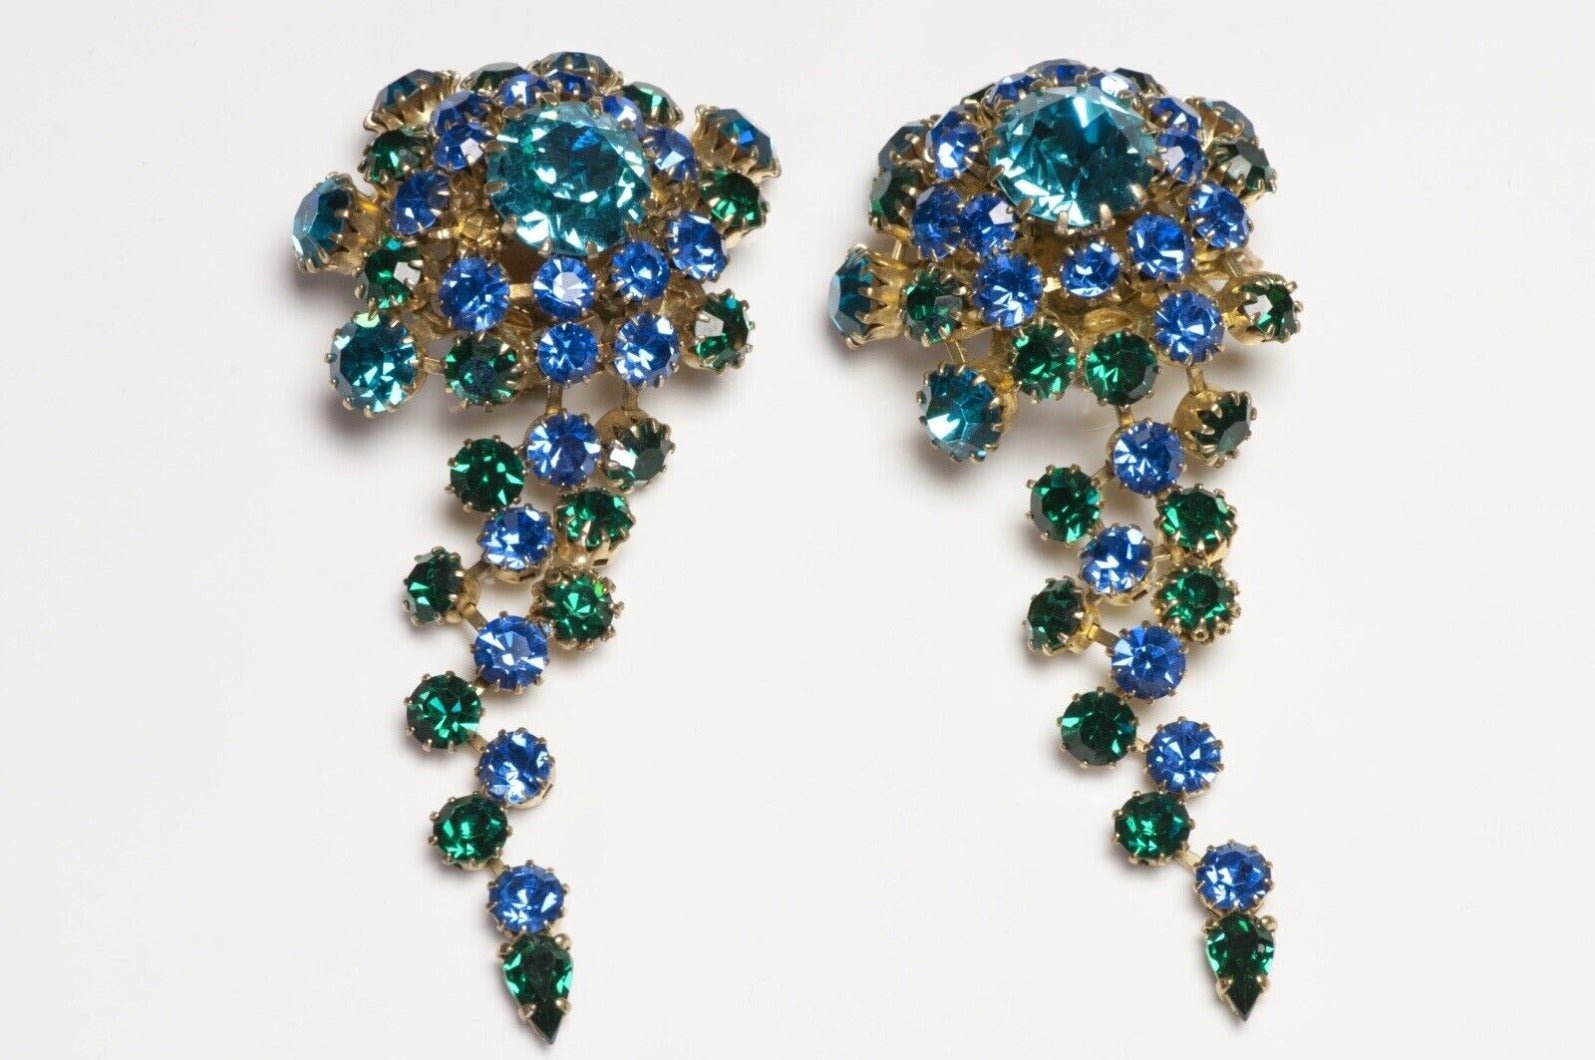 Countess Cissy Zoltowska CIS 1950’s Long Green Blue Crystal Earrings - DSF Antique Jewelry